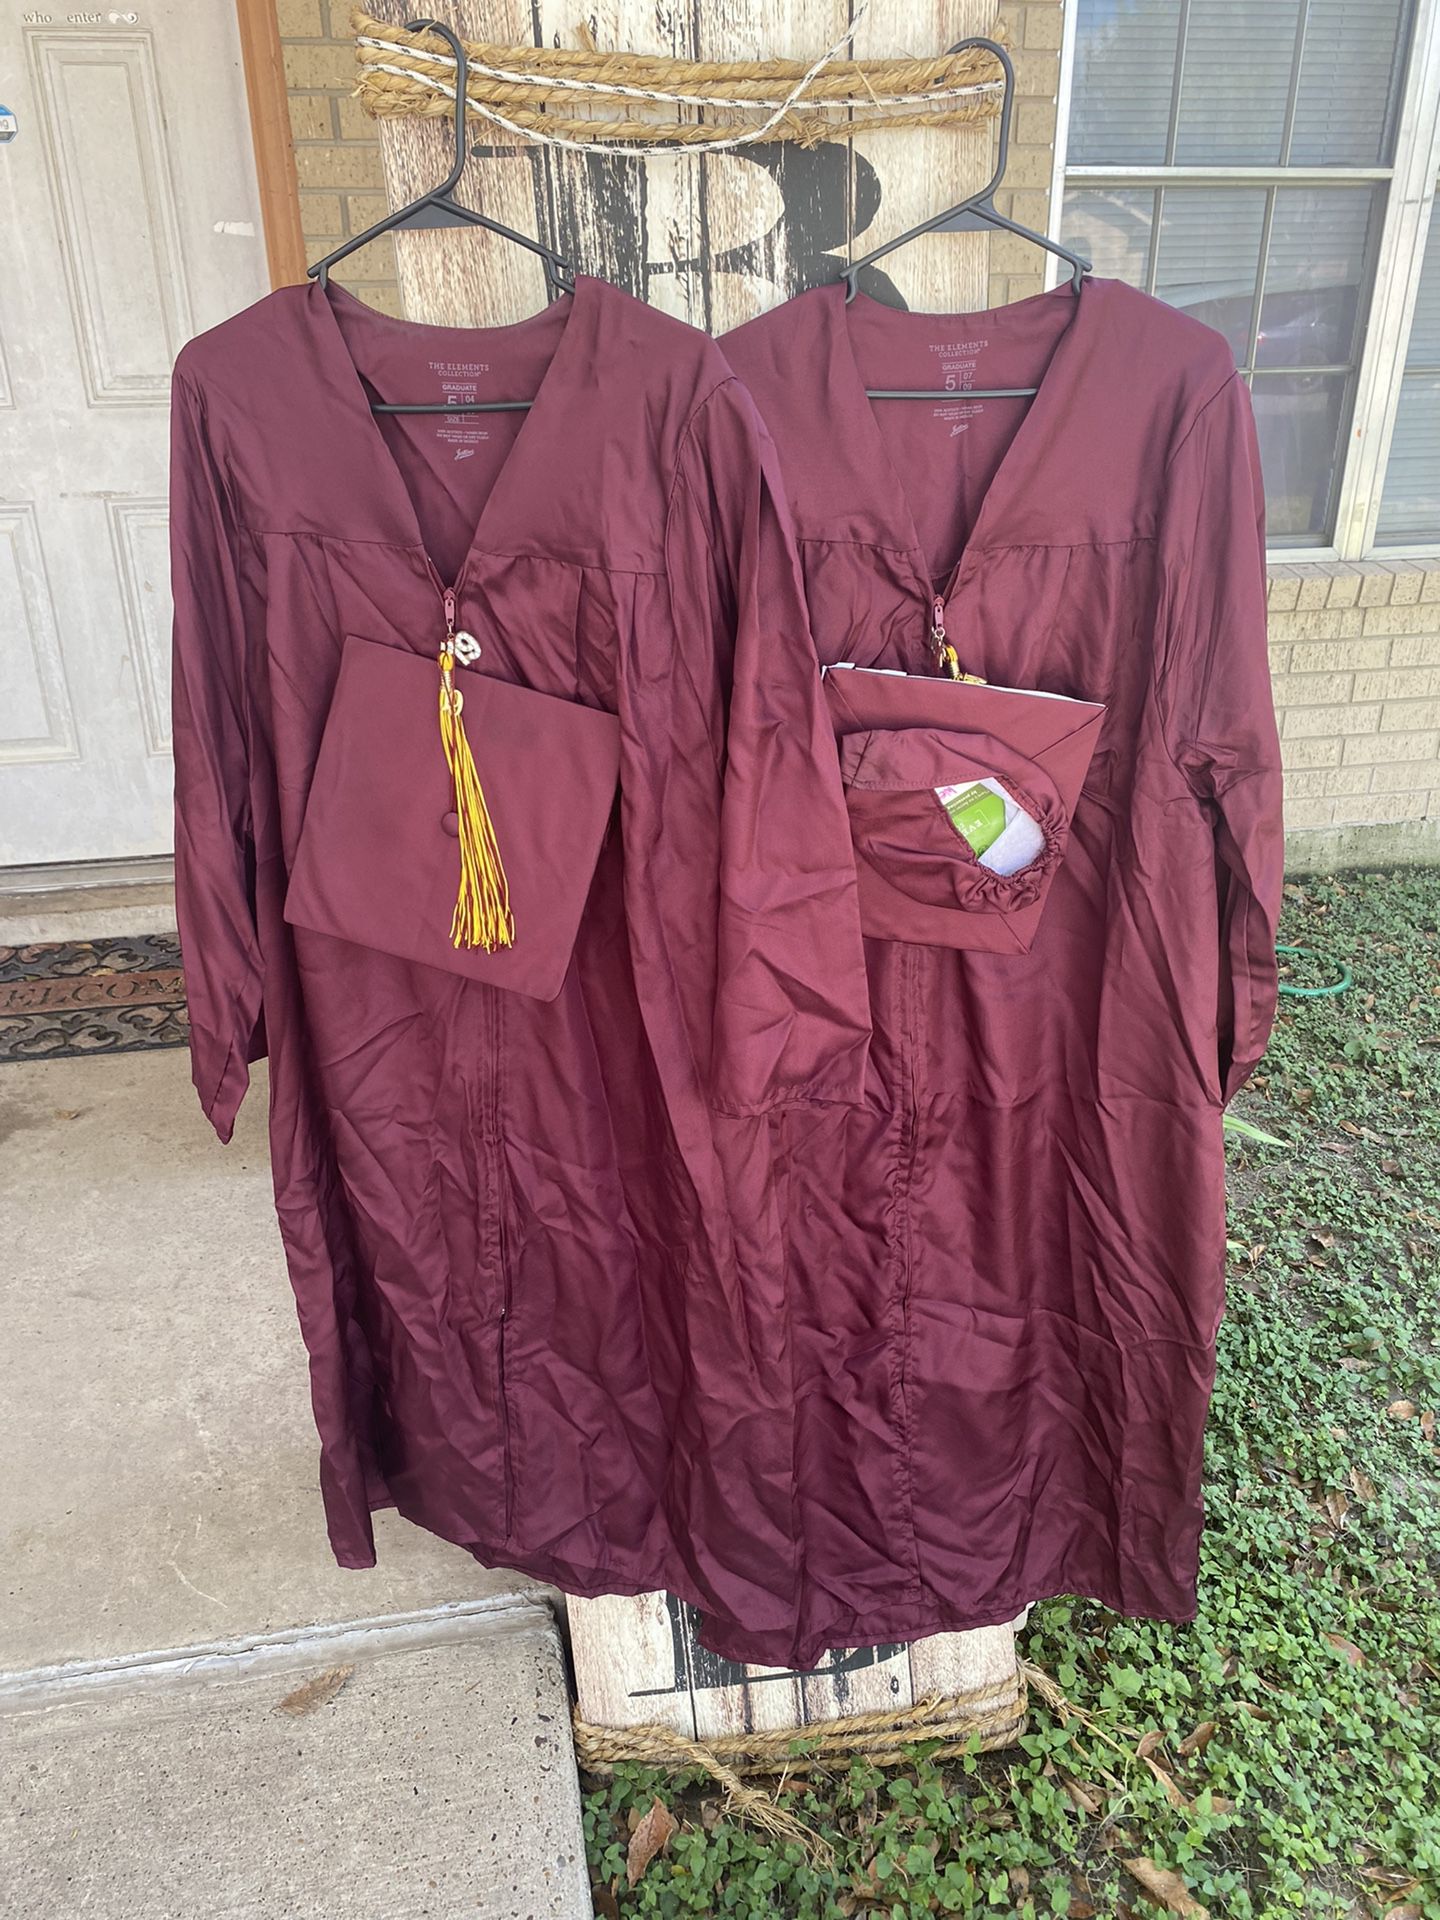 Cap And gown 